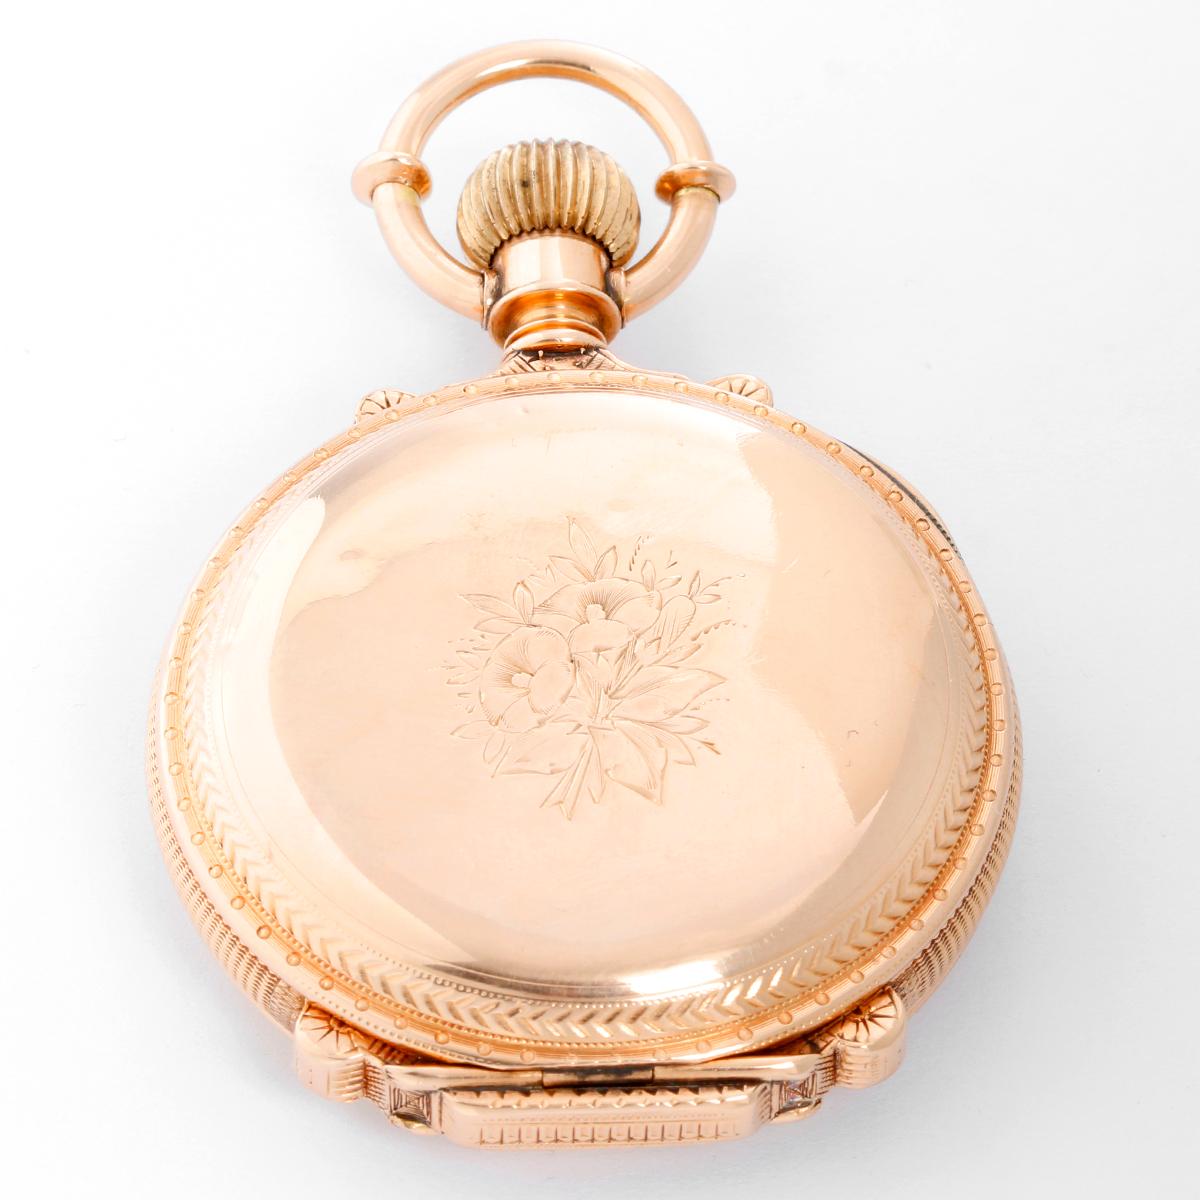 Waltham 14k Yellow Gold Box Hinge Pocket Watch - Manual winding. 14K Yellow gold case ( 54 mm) with beautiful engraving. White dial with Arabic numerals and ornate gold decorative swirls . Pre-owned with custom box .